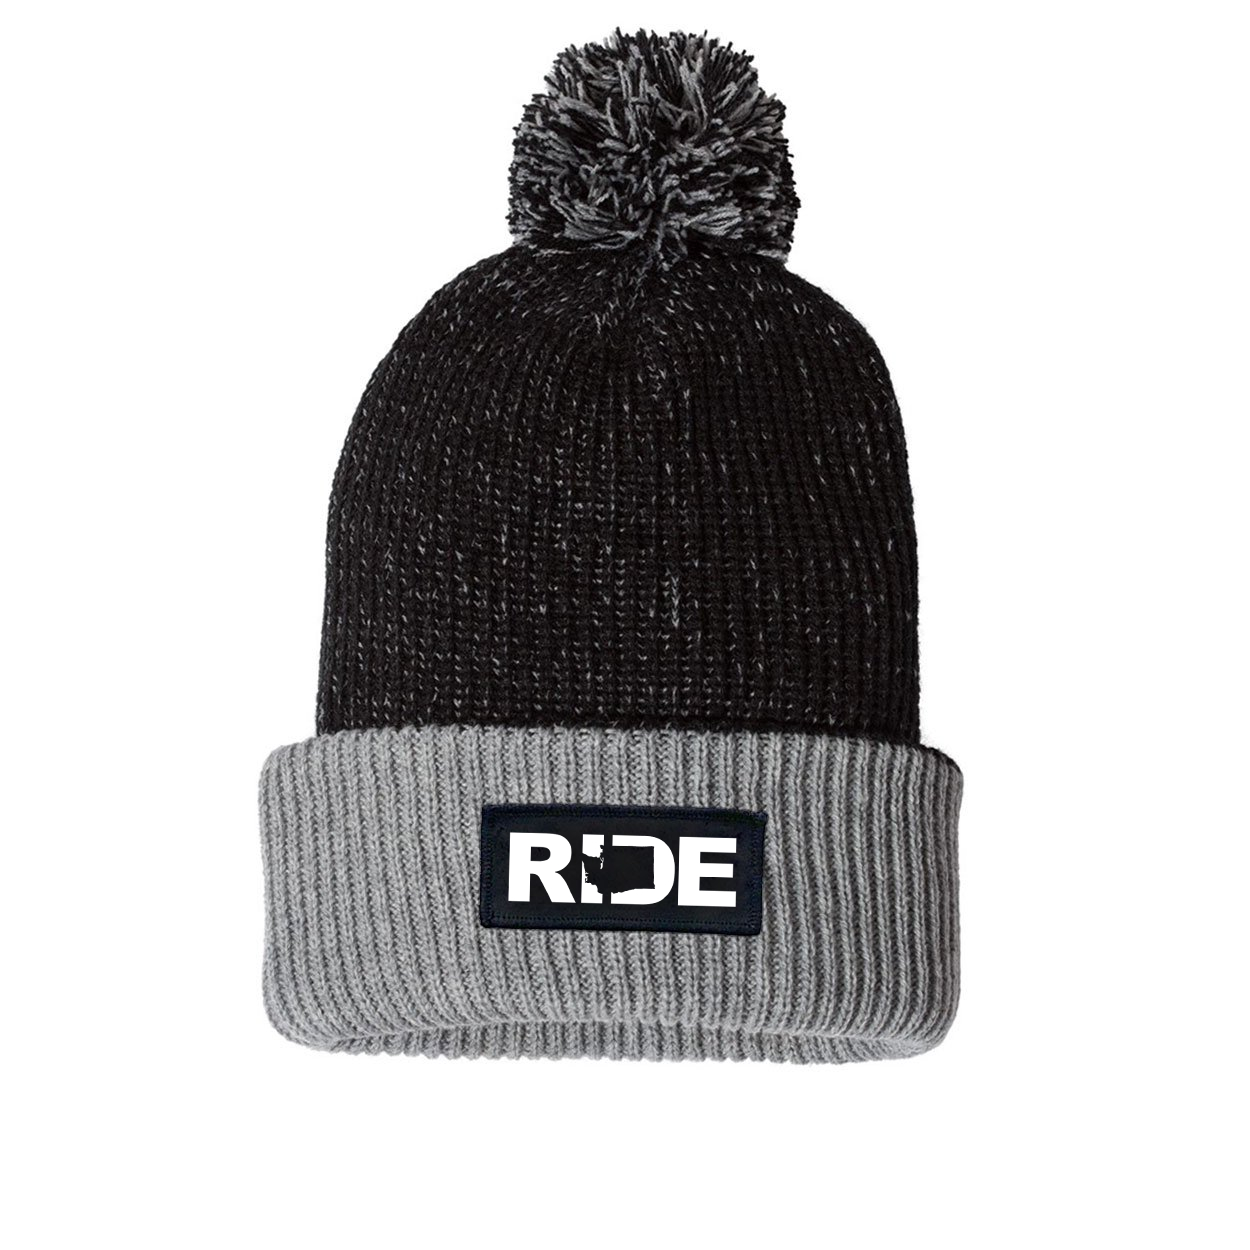 Ride Washington Night Out Woven Patch Roll Up Pom Knit Beanie Black/Gray (White Logo)